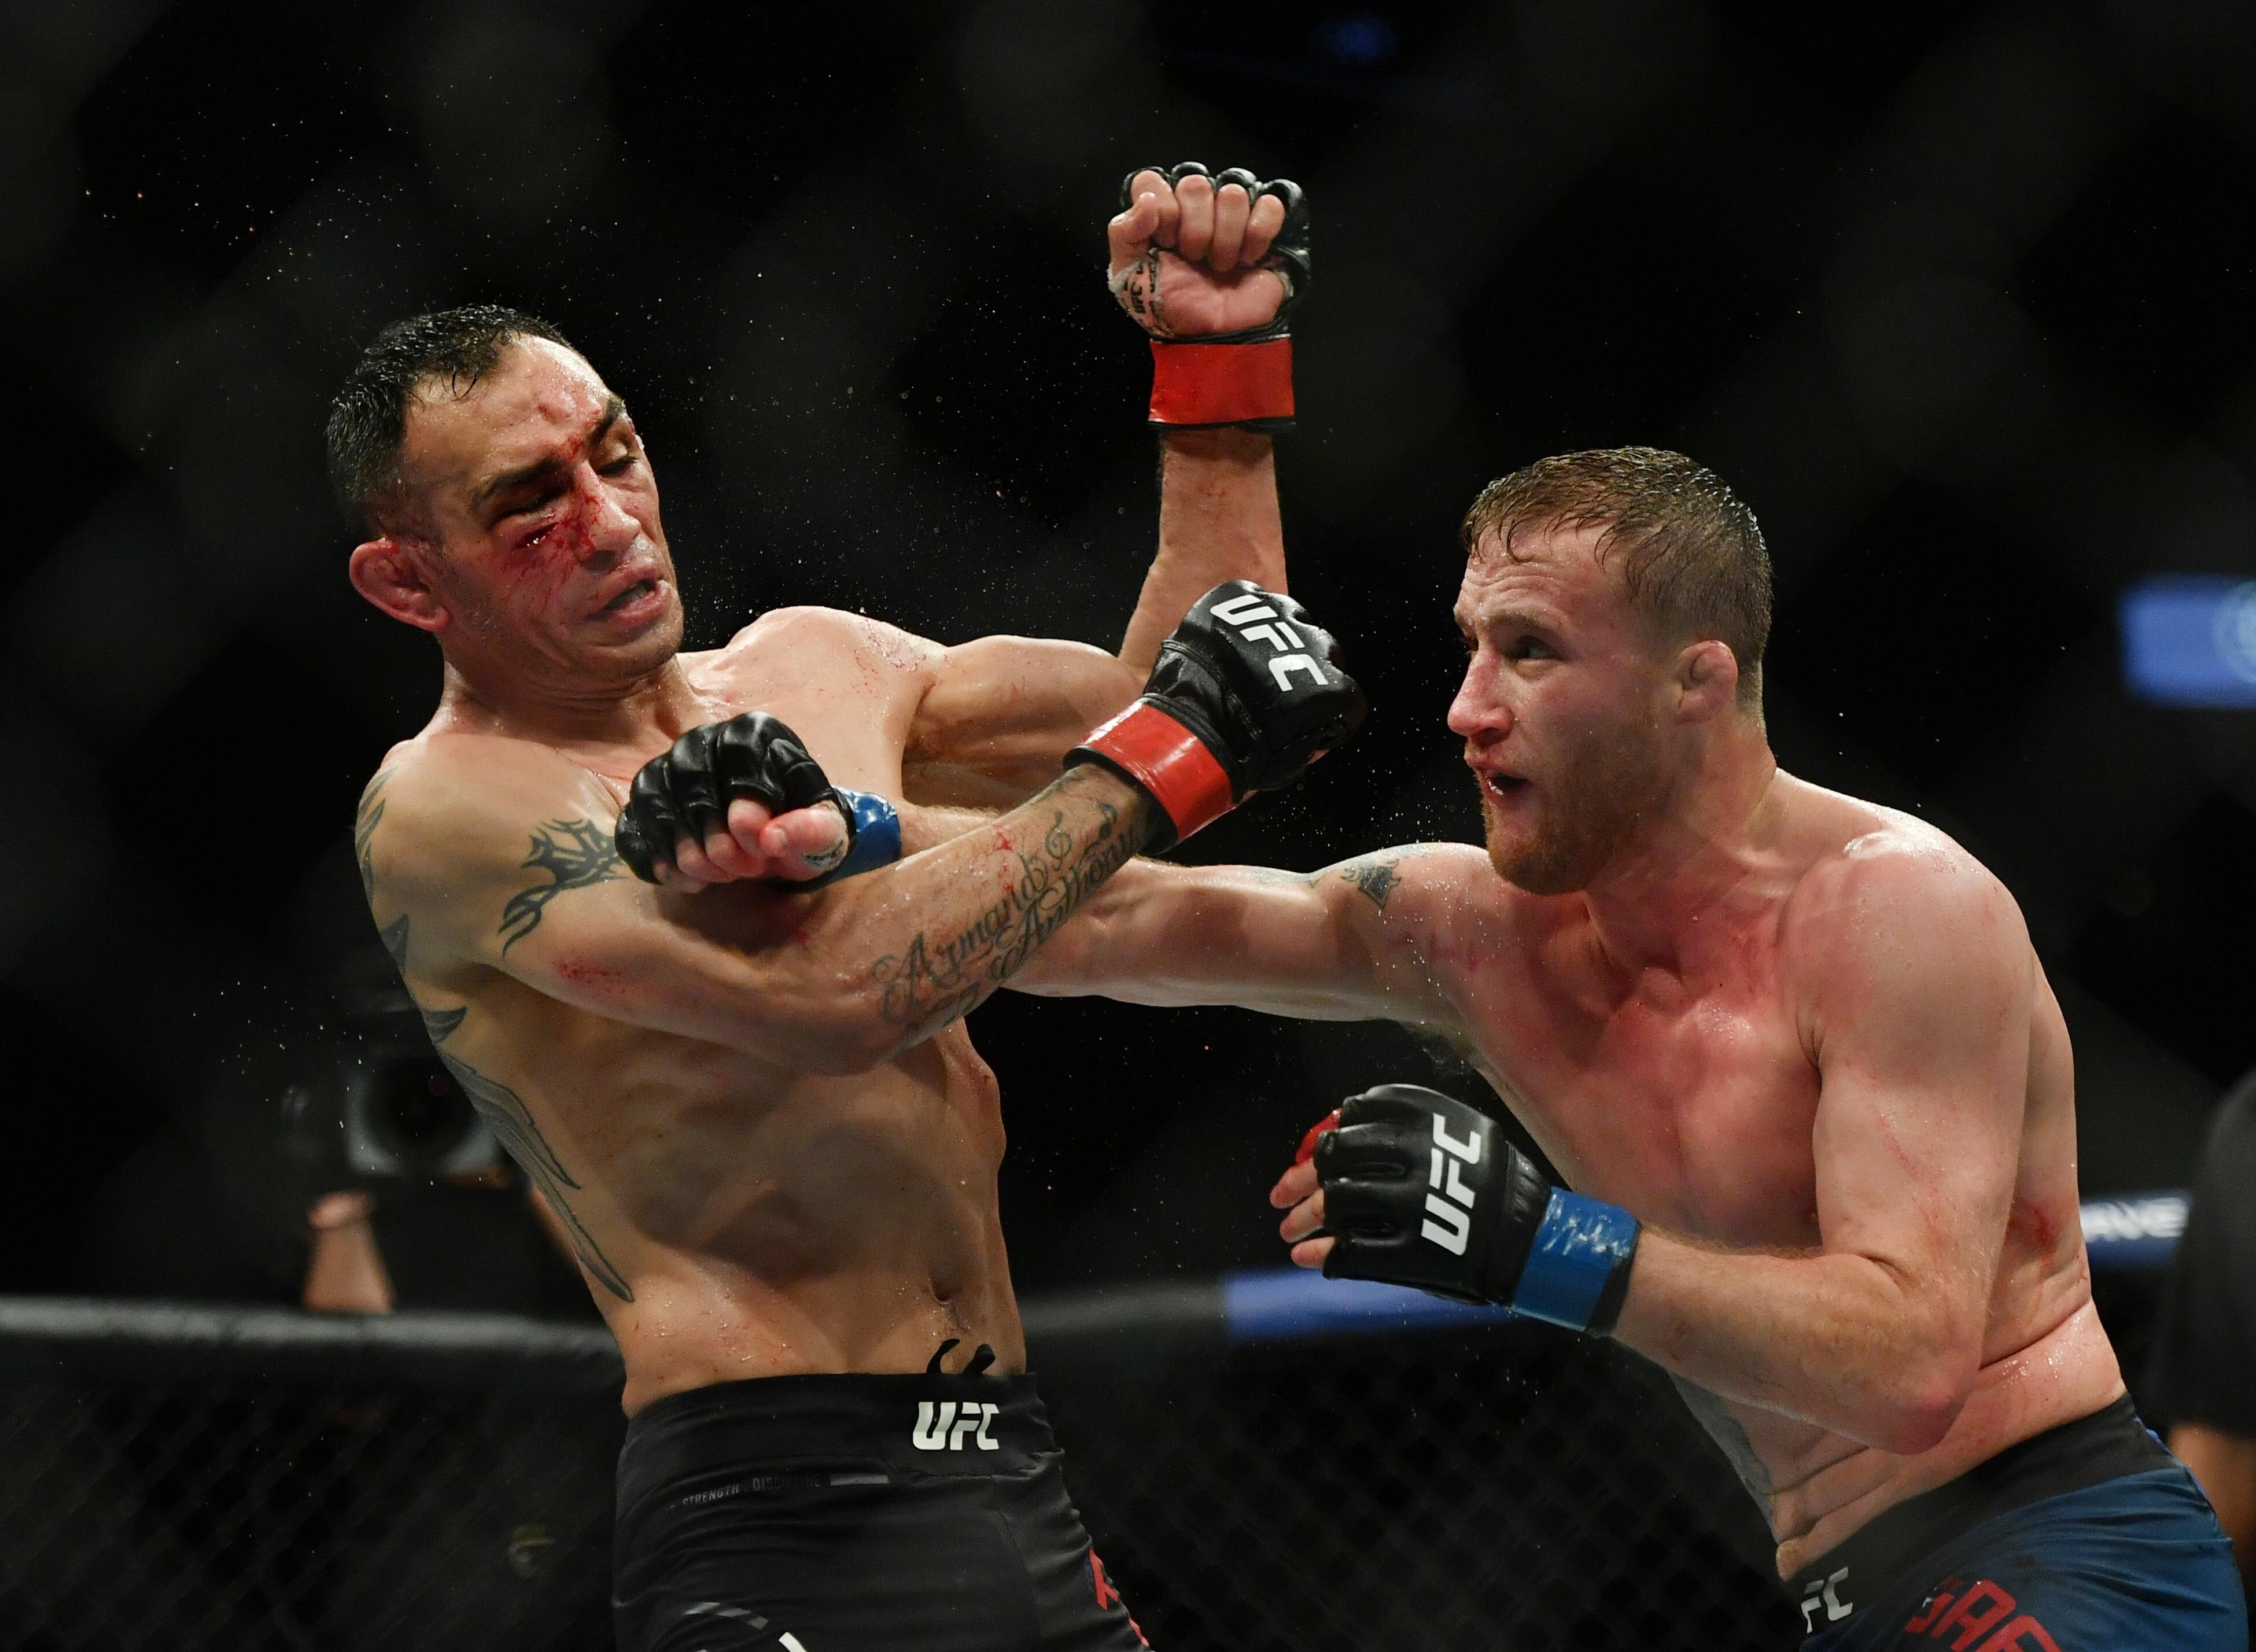 Tony Ferguson hits Justin Gaethje with a right hand at UFC 249. Photo: USA TODAY Sports